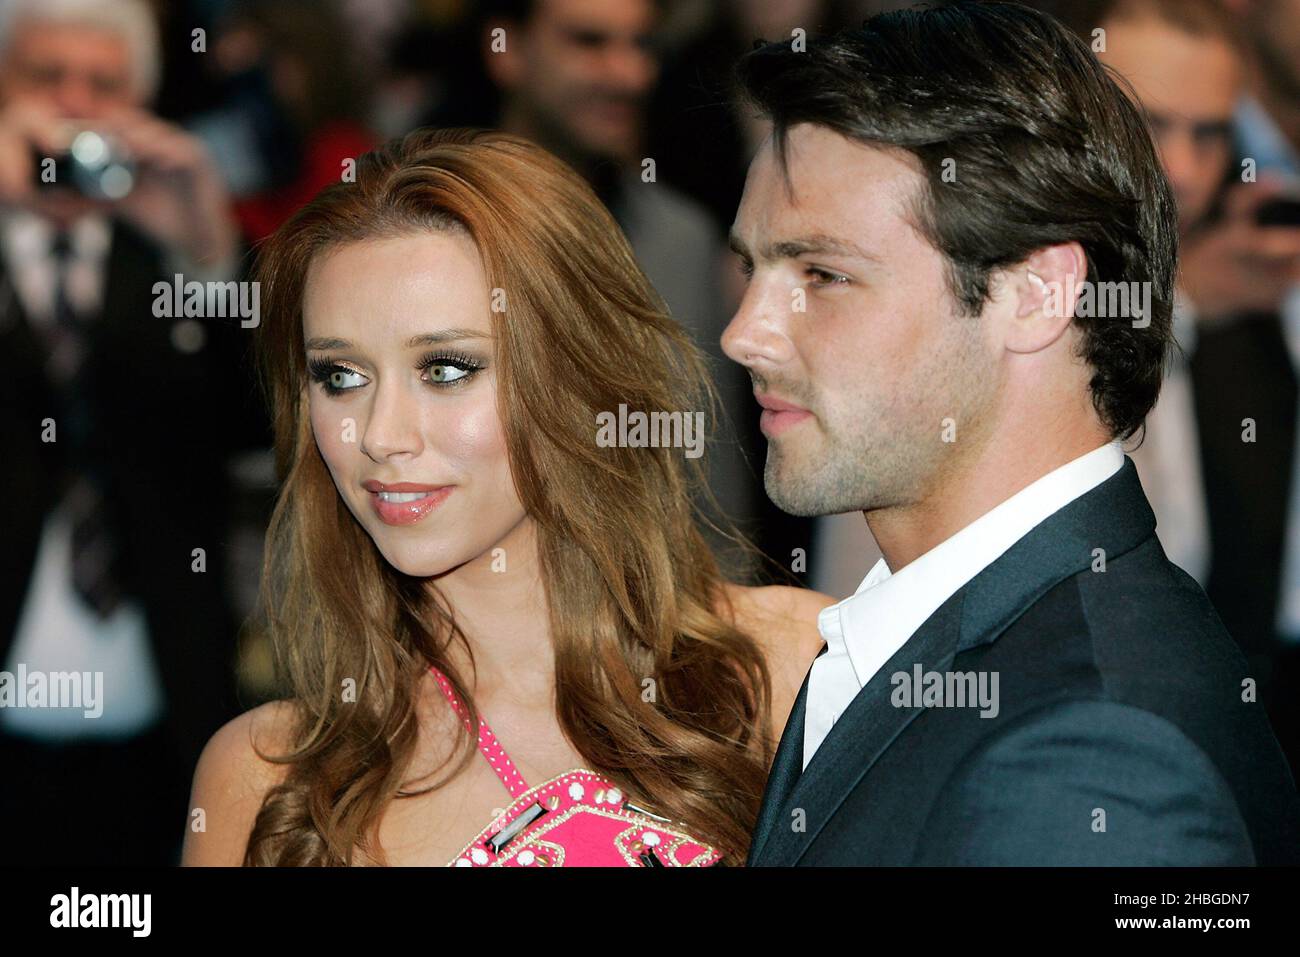 Una Healy and Ben Foden arrive at the UK Premiere of The Pirates of The Caribbean of Stranger Tides at the Vue Cinema in Westfield Shopping Centre in Central London. Stock Photo